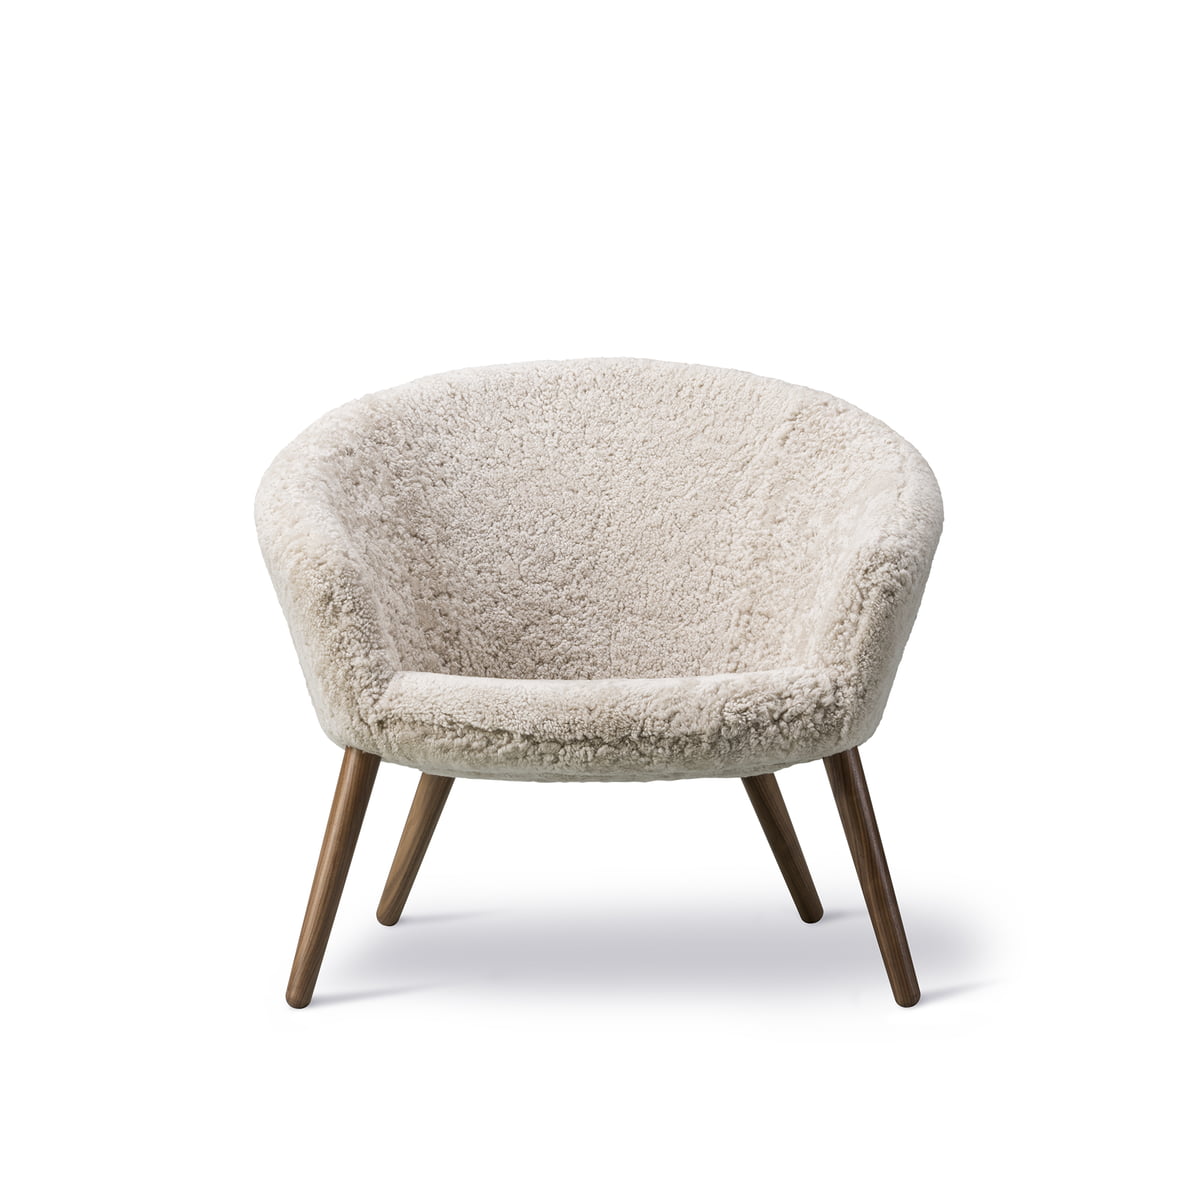 Fredericia - Ditzel Lounge chair